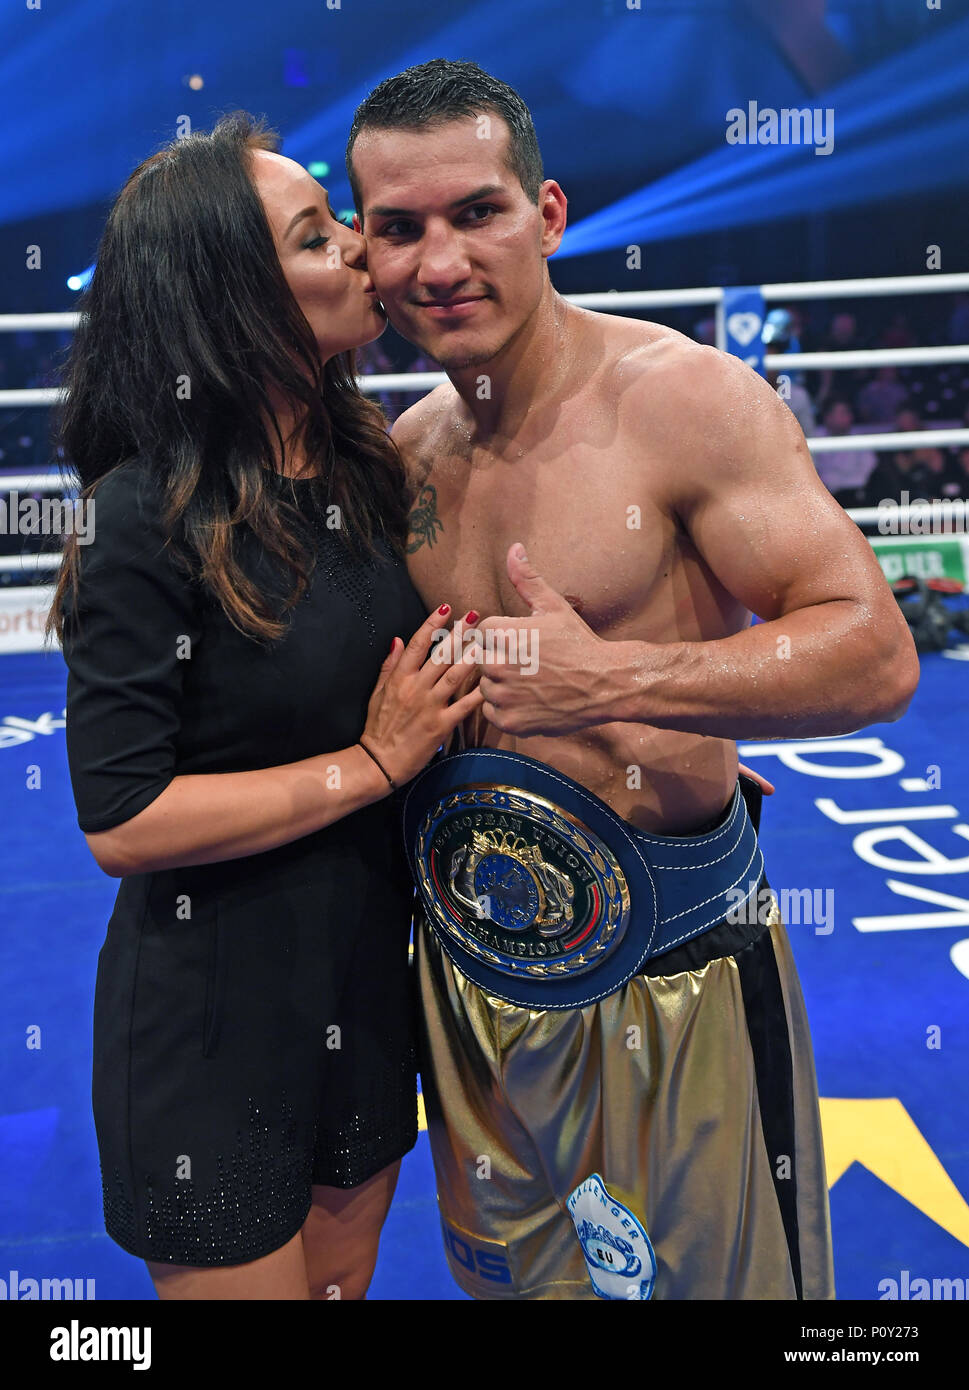 Leipzig, Germany. 09th June, 2018. 09 June 2018, Germany, Leipzig: Boxing,  professional, European Championships, middleweight: Germany's Jack Culcay  celebrates his victory with wife Anna. Credit: Hendrik Schmidt/dpa-Zentralbild/ZB/dpa/Alamy  Live News ...